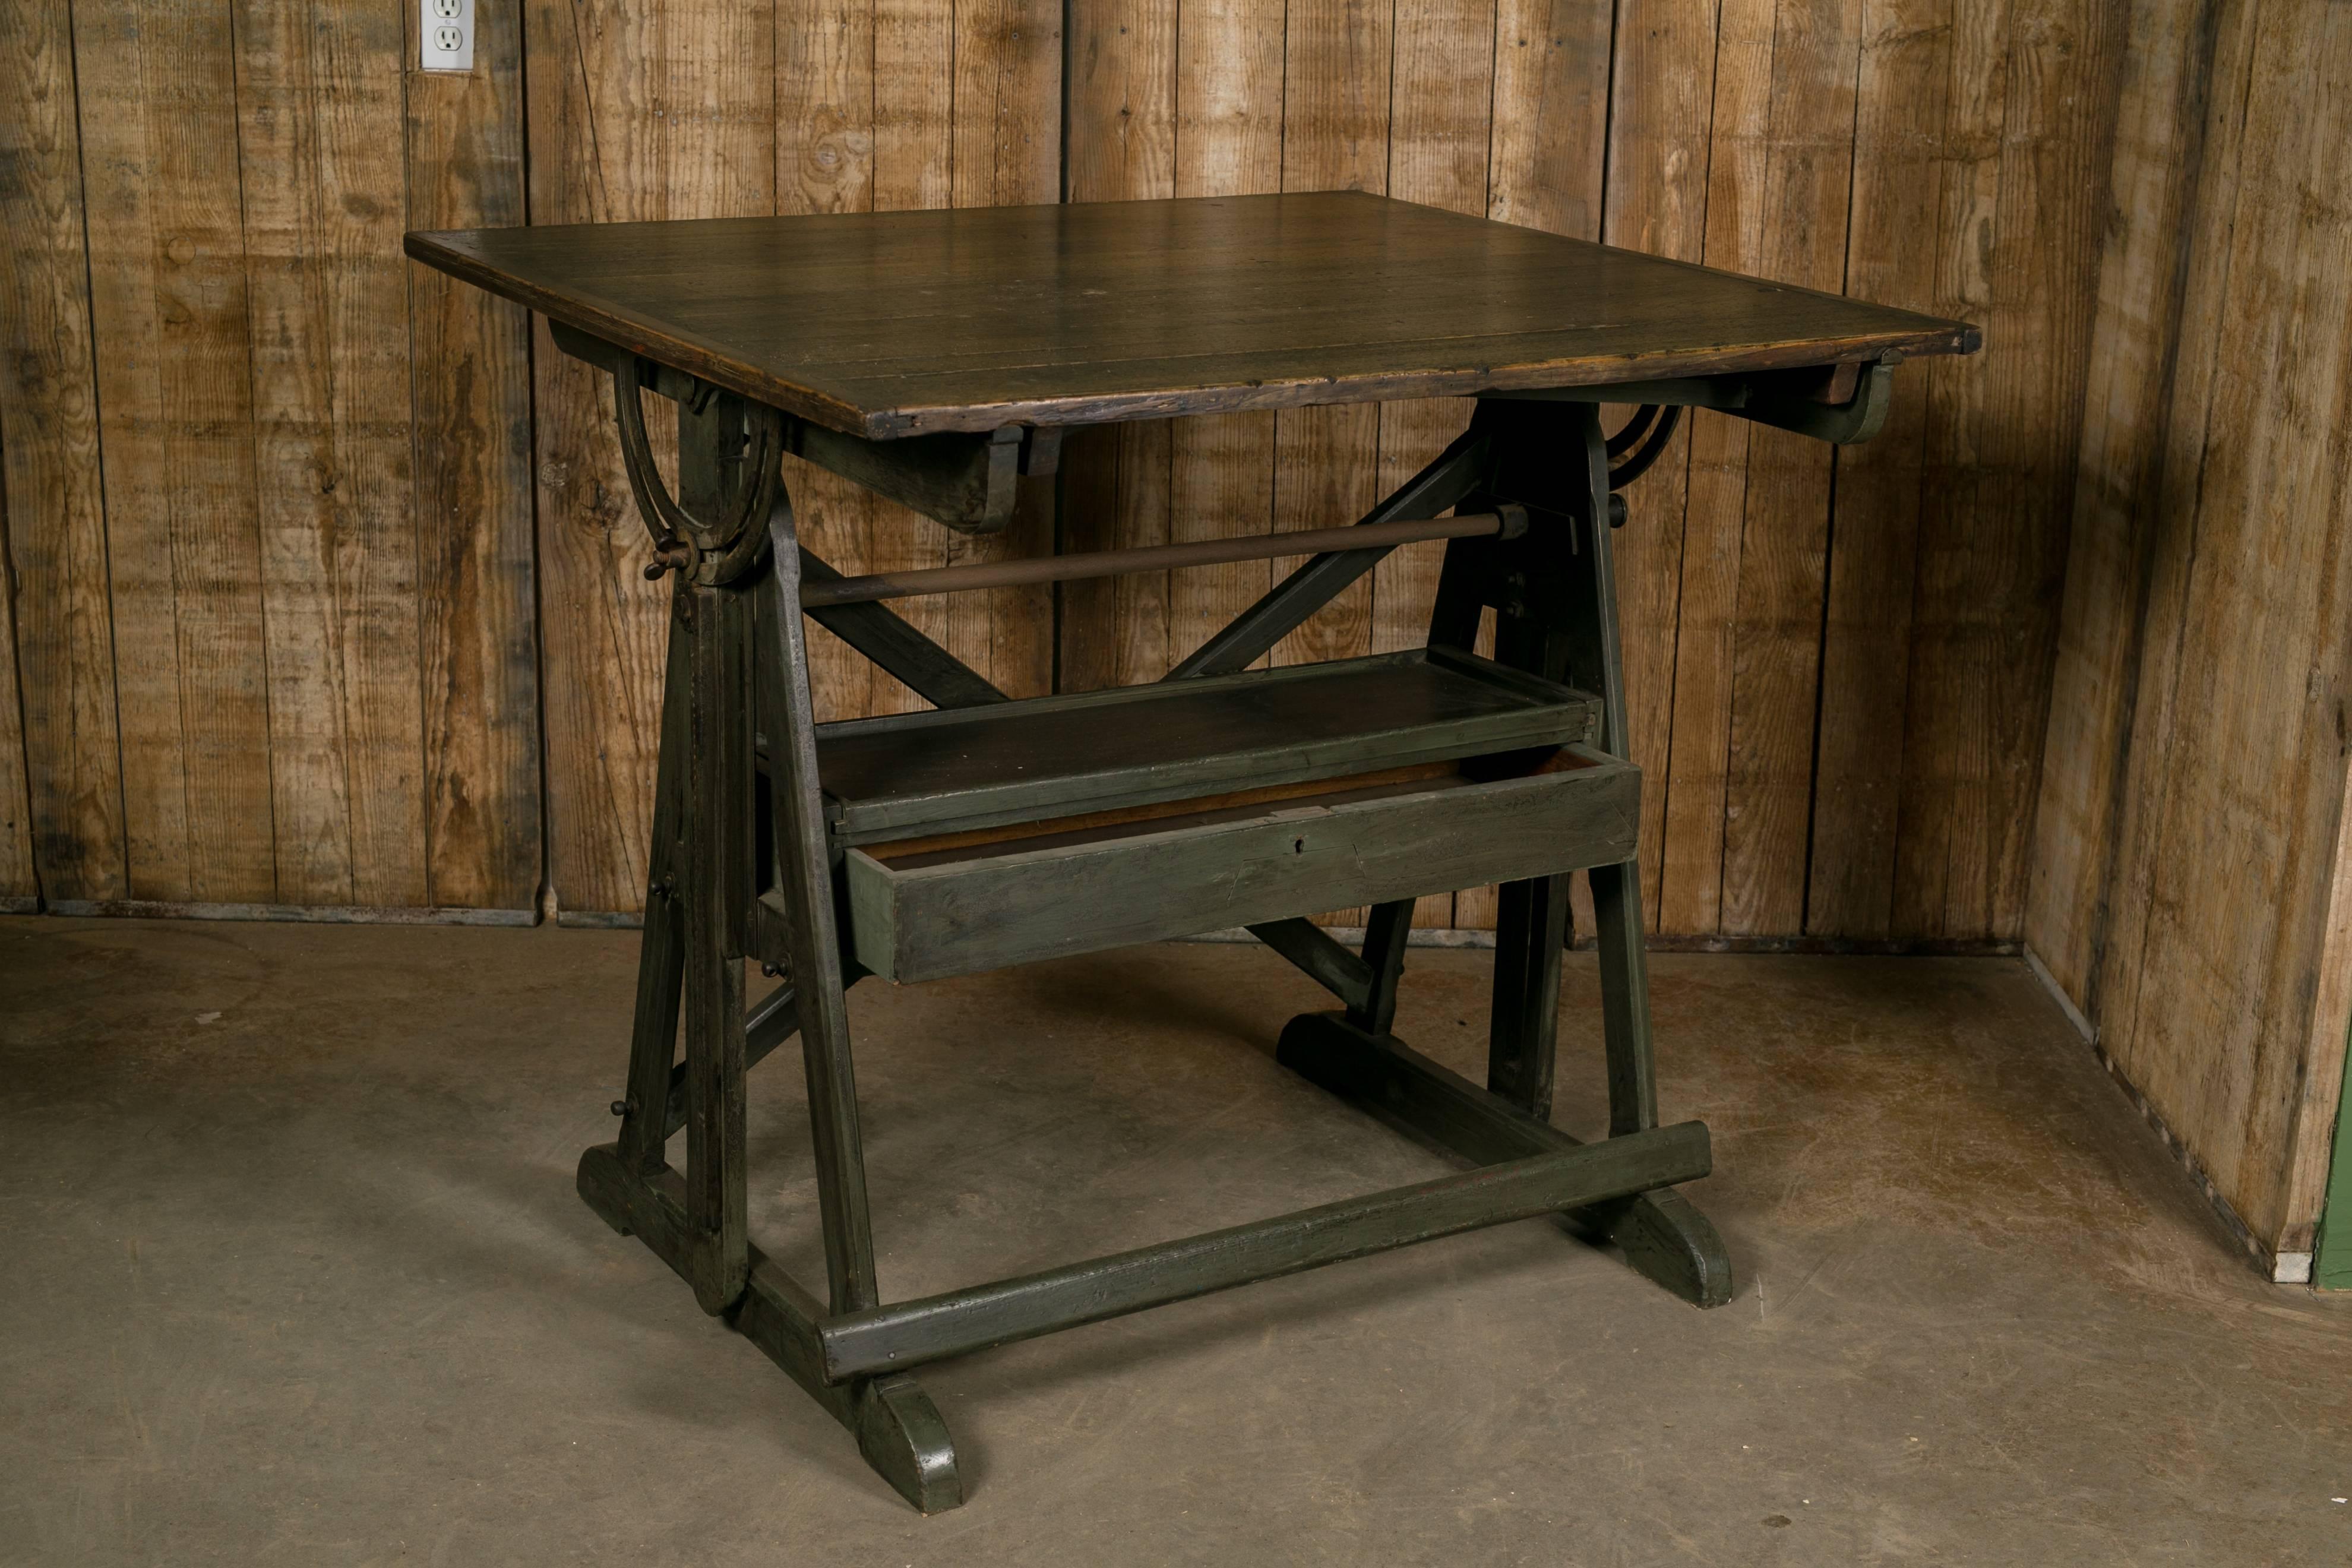 Early 20th Century Antique Industrial Architect's Tilt Top Drafting Table from Belgium, circa 1900